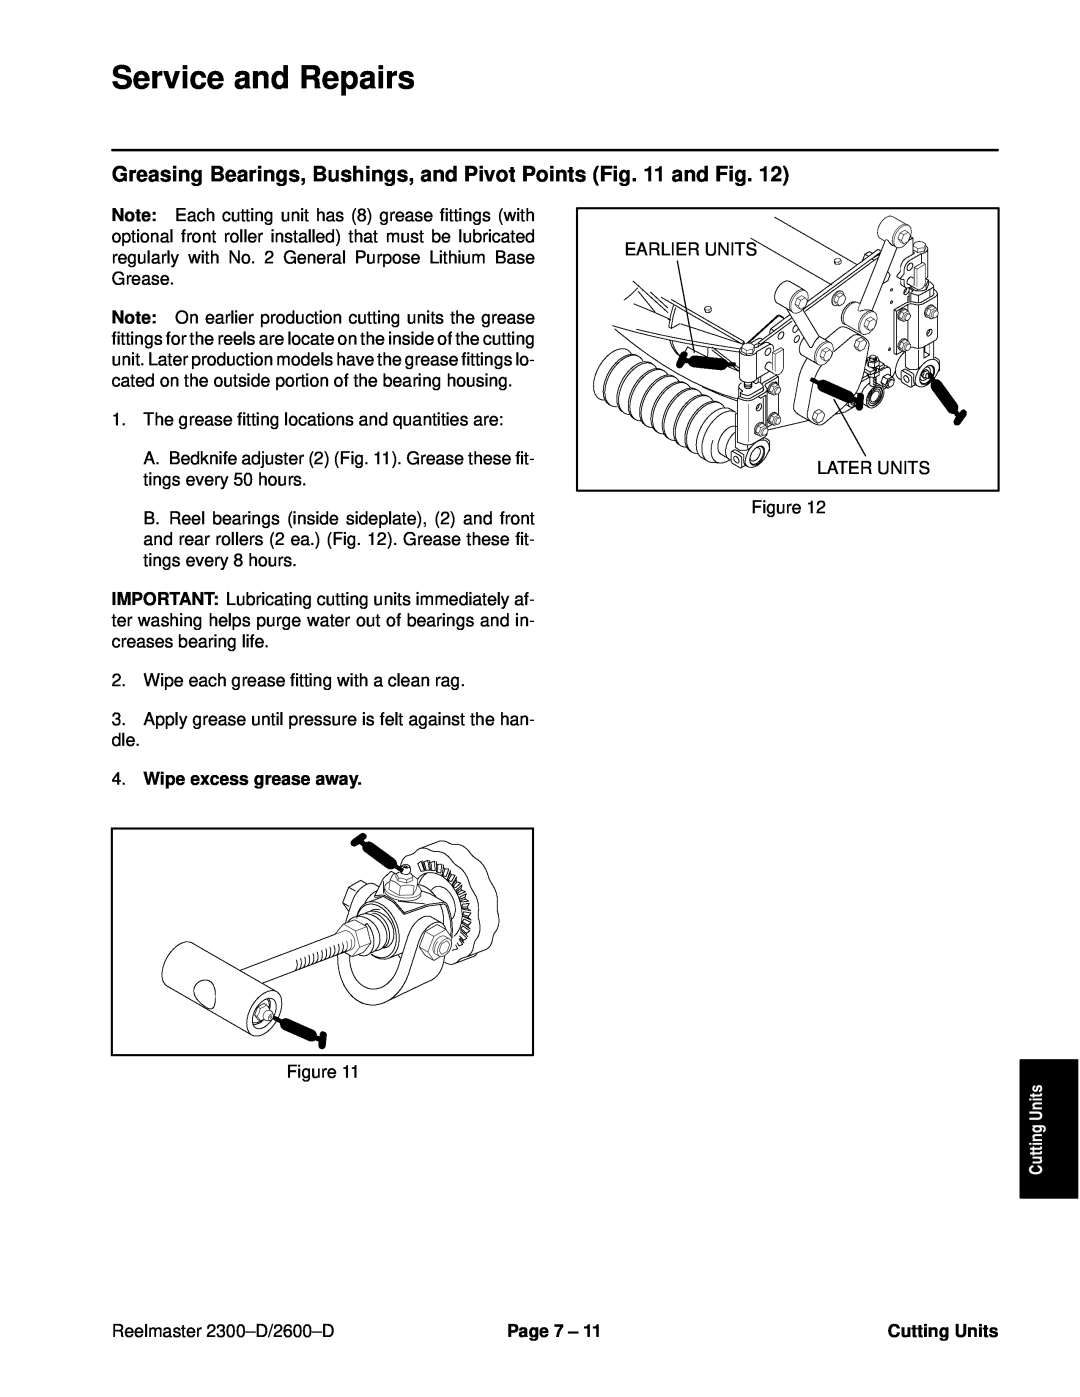 Toro 2600D Greasing Bearings, Bushings, and Pivot Points and Fig, Service and Repairs, Wipe excess grease away, Page 7 ± 